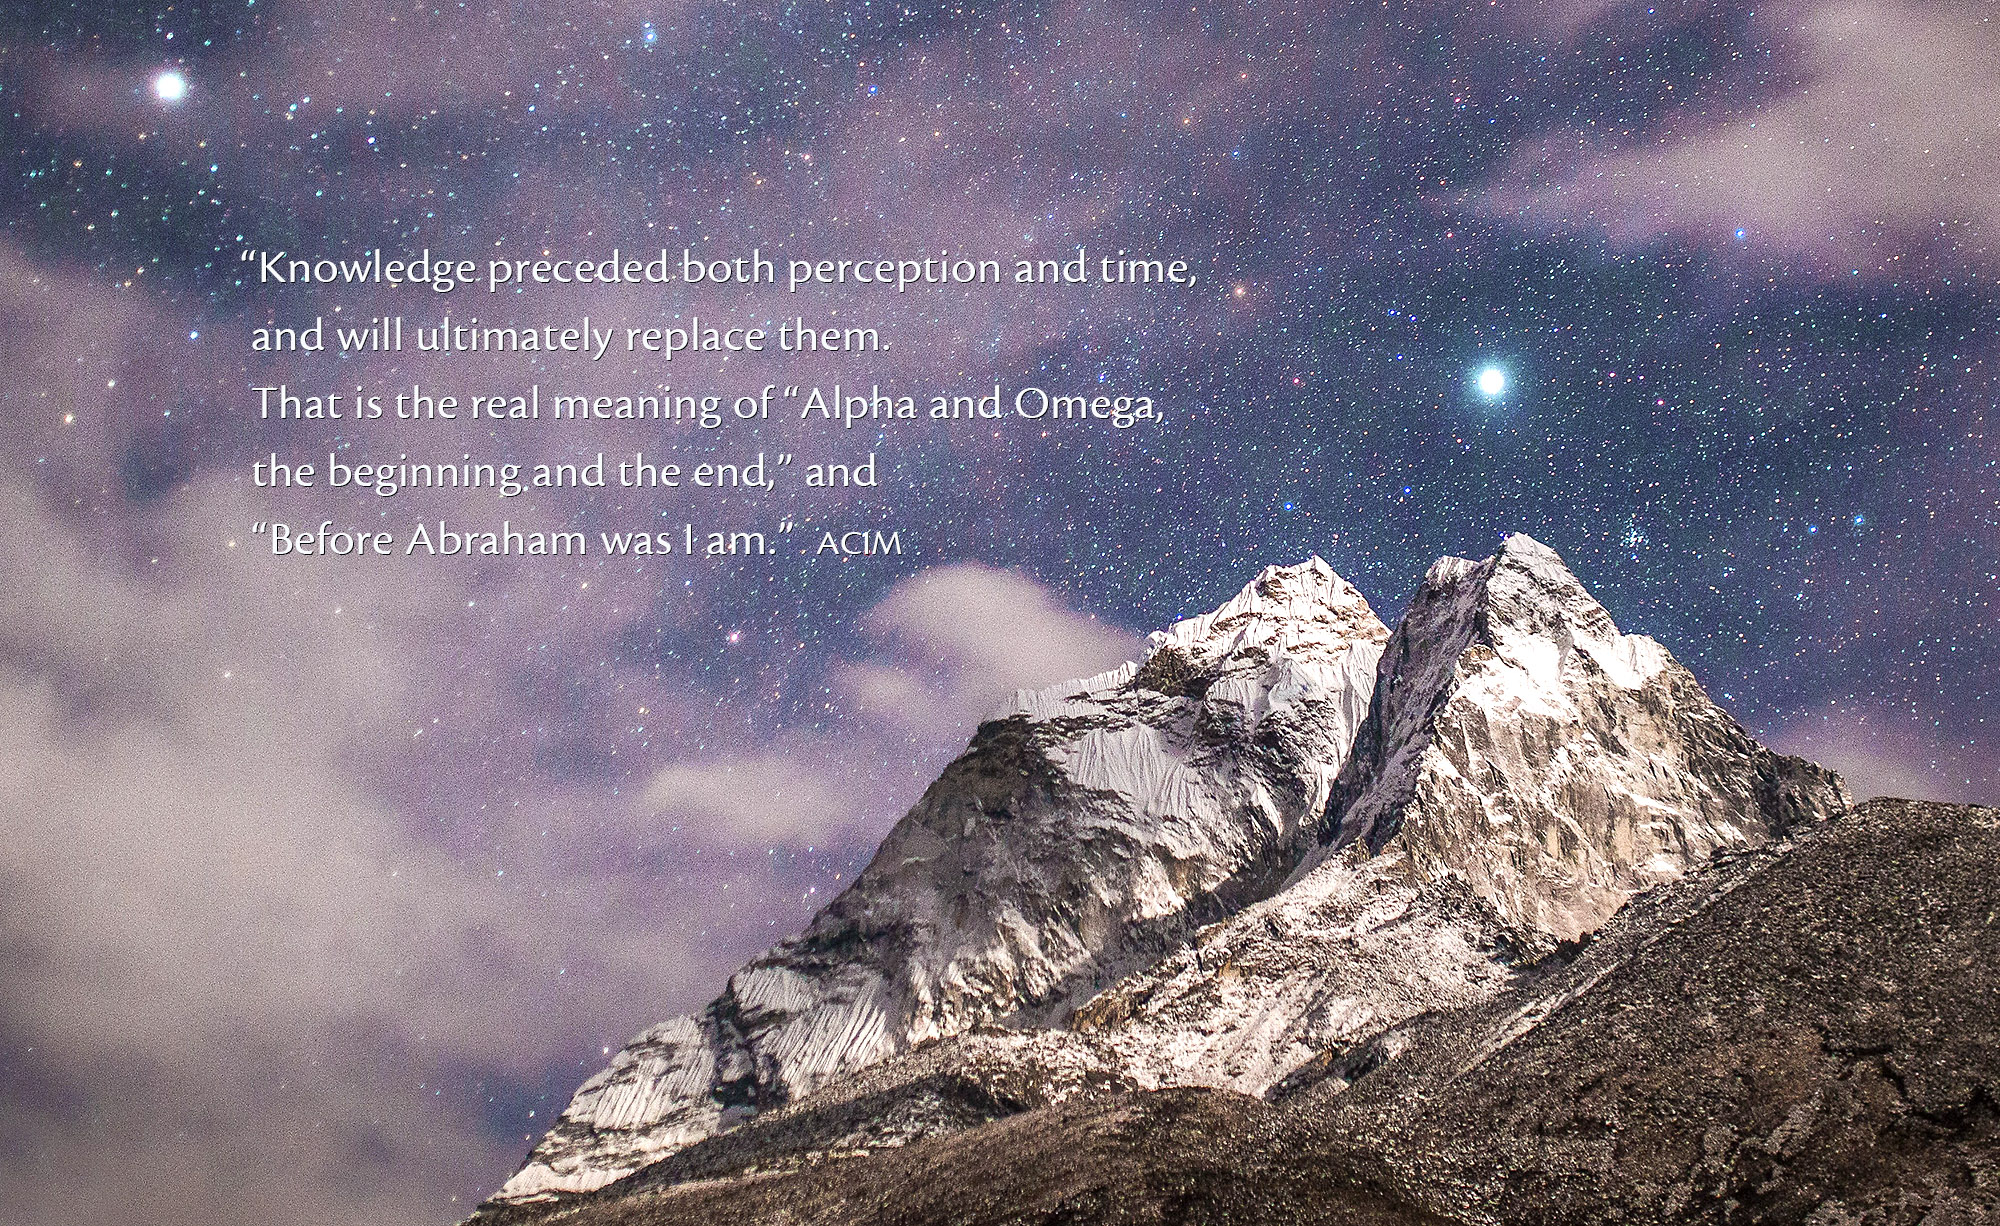 Knowledge preceded both perception and time, and will ultimately replace them. That is the real meaning of “Alpha and Omega, the beginning and the end,” and “Before Abraham was I am.